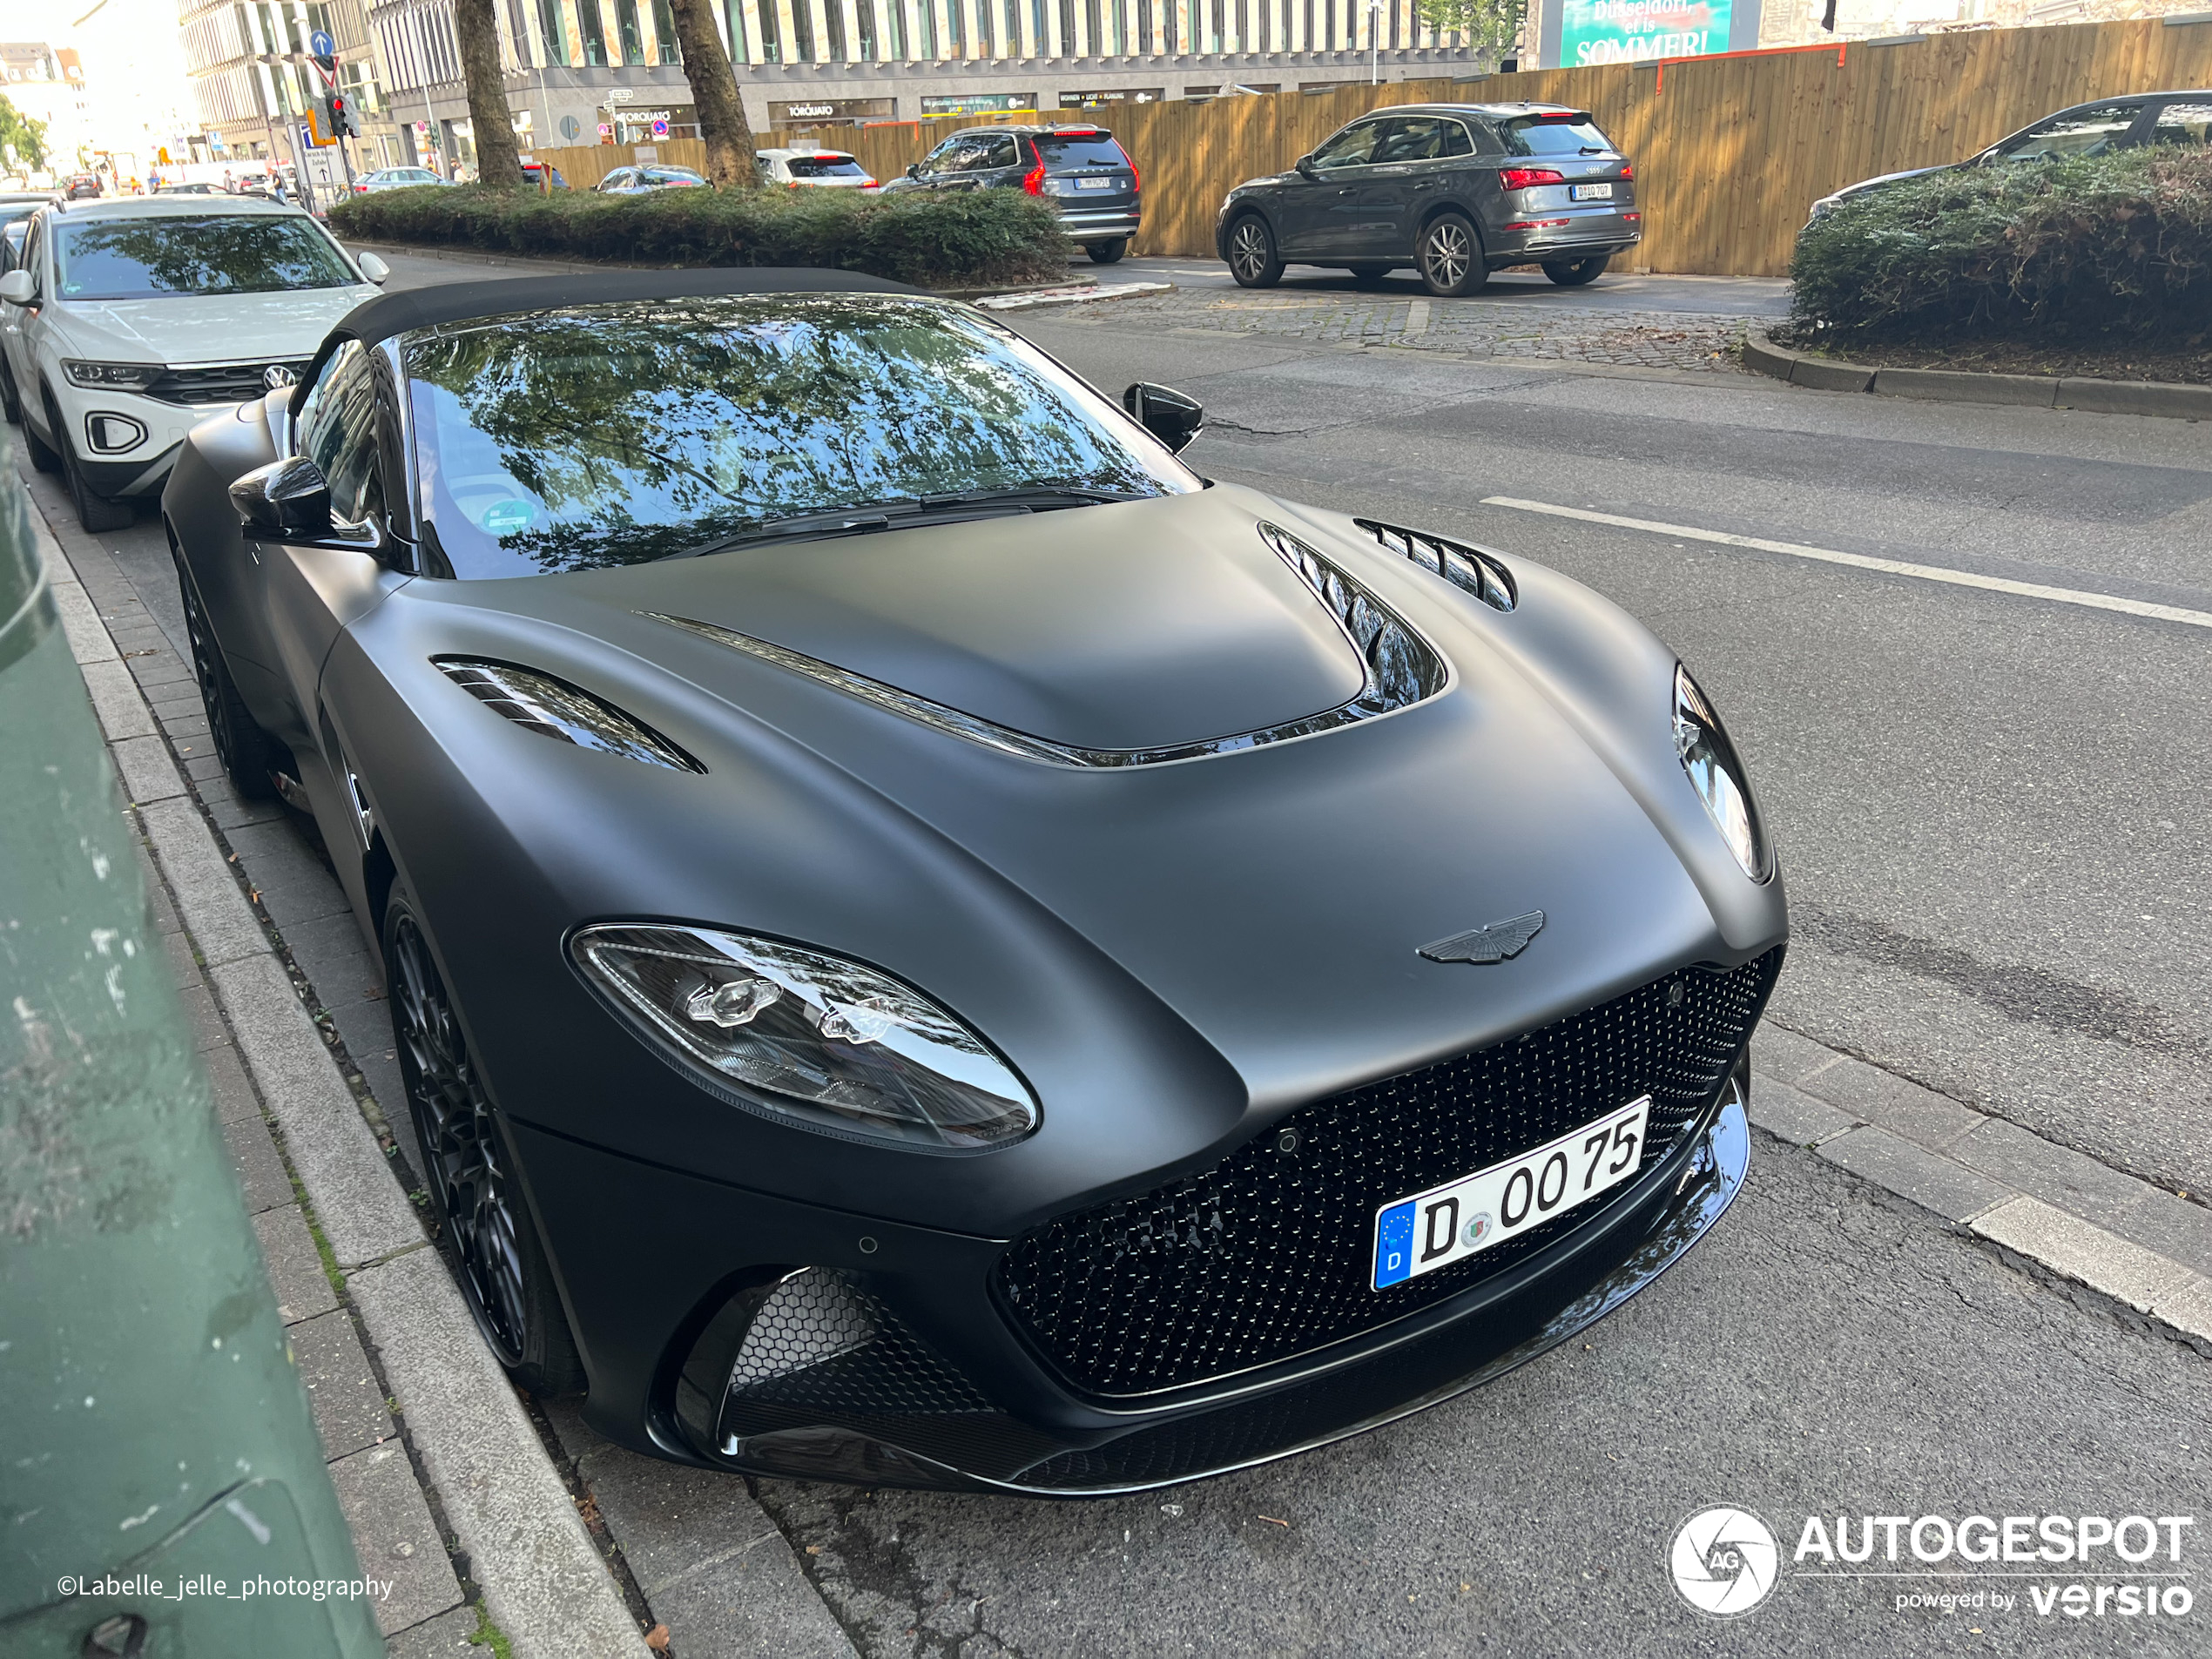 The very first Aston Martin DBS 770 Ultimate Volante Shows up in Düsseldorf, Germany